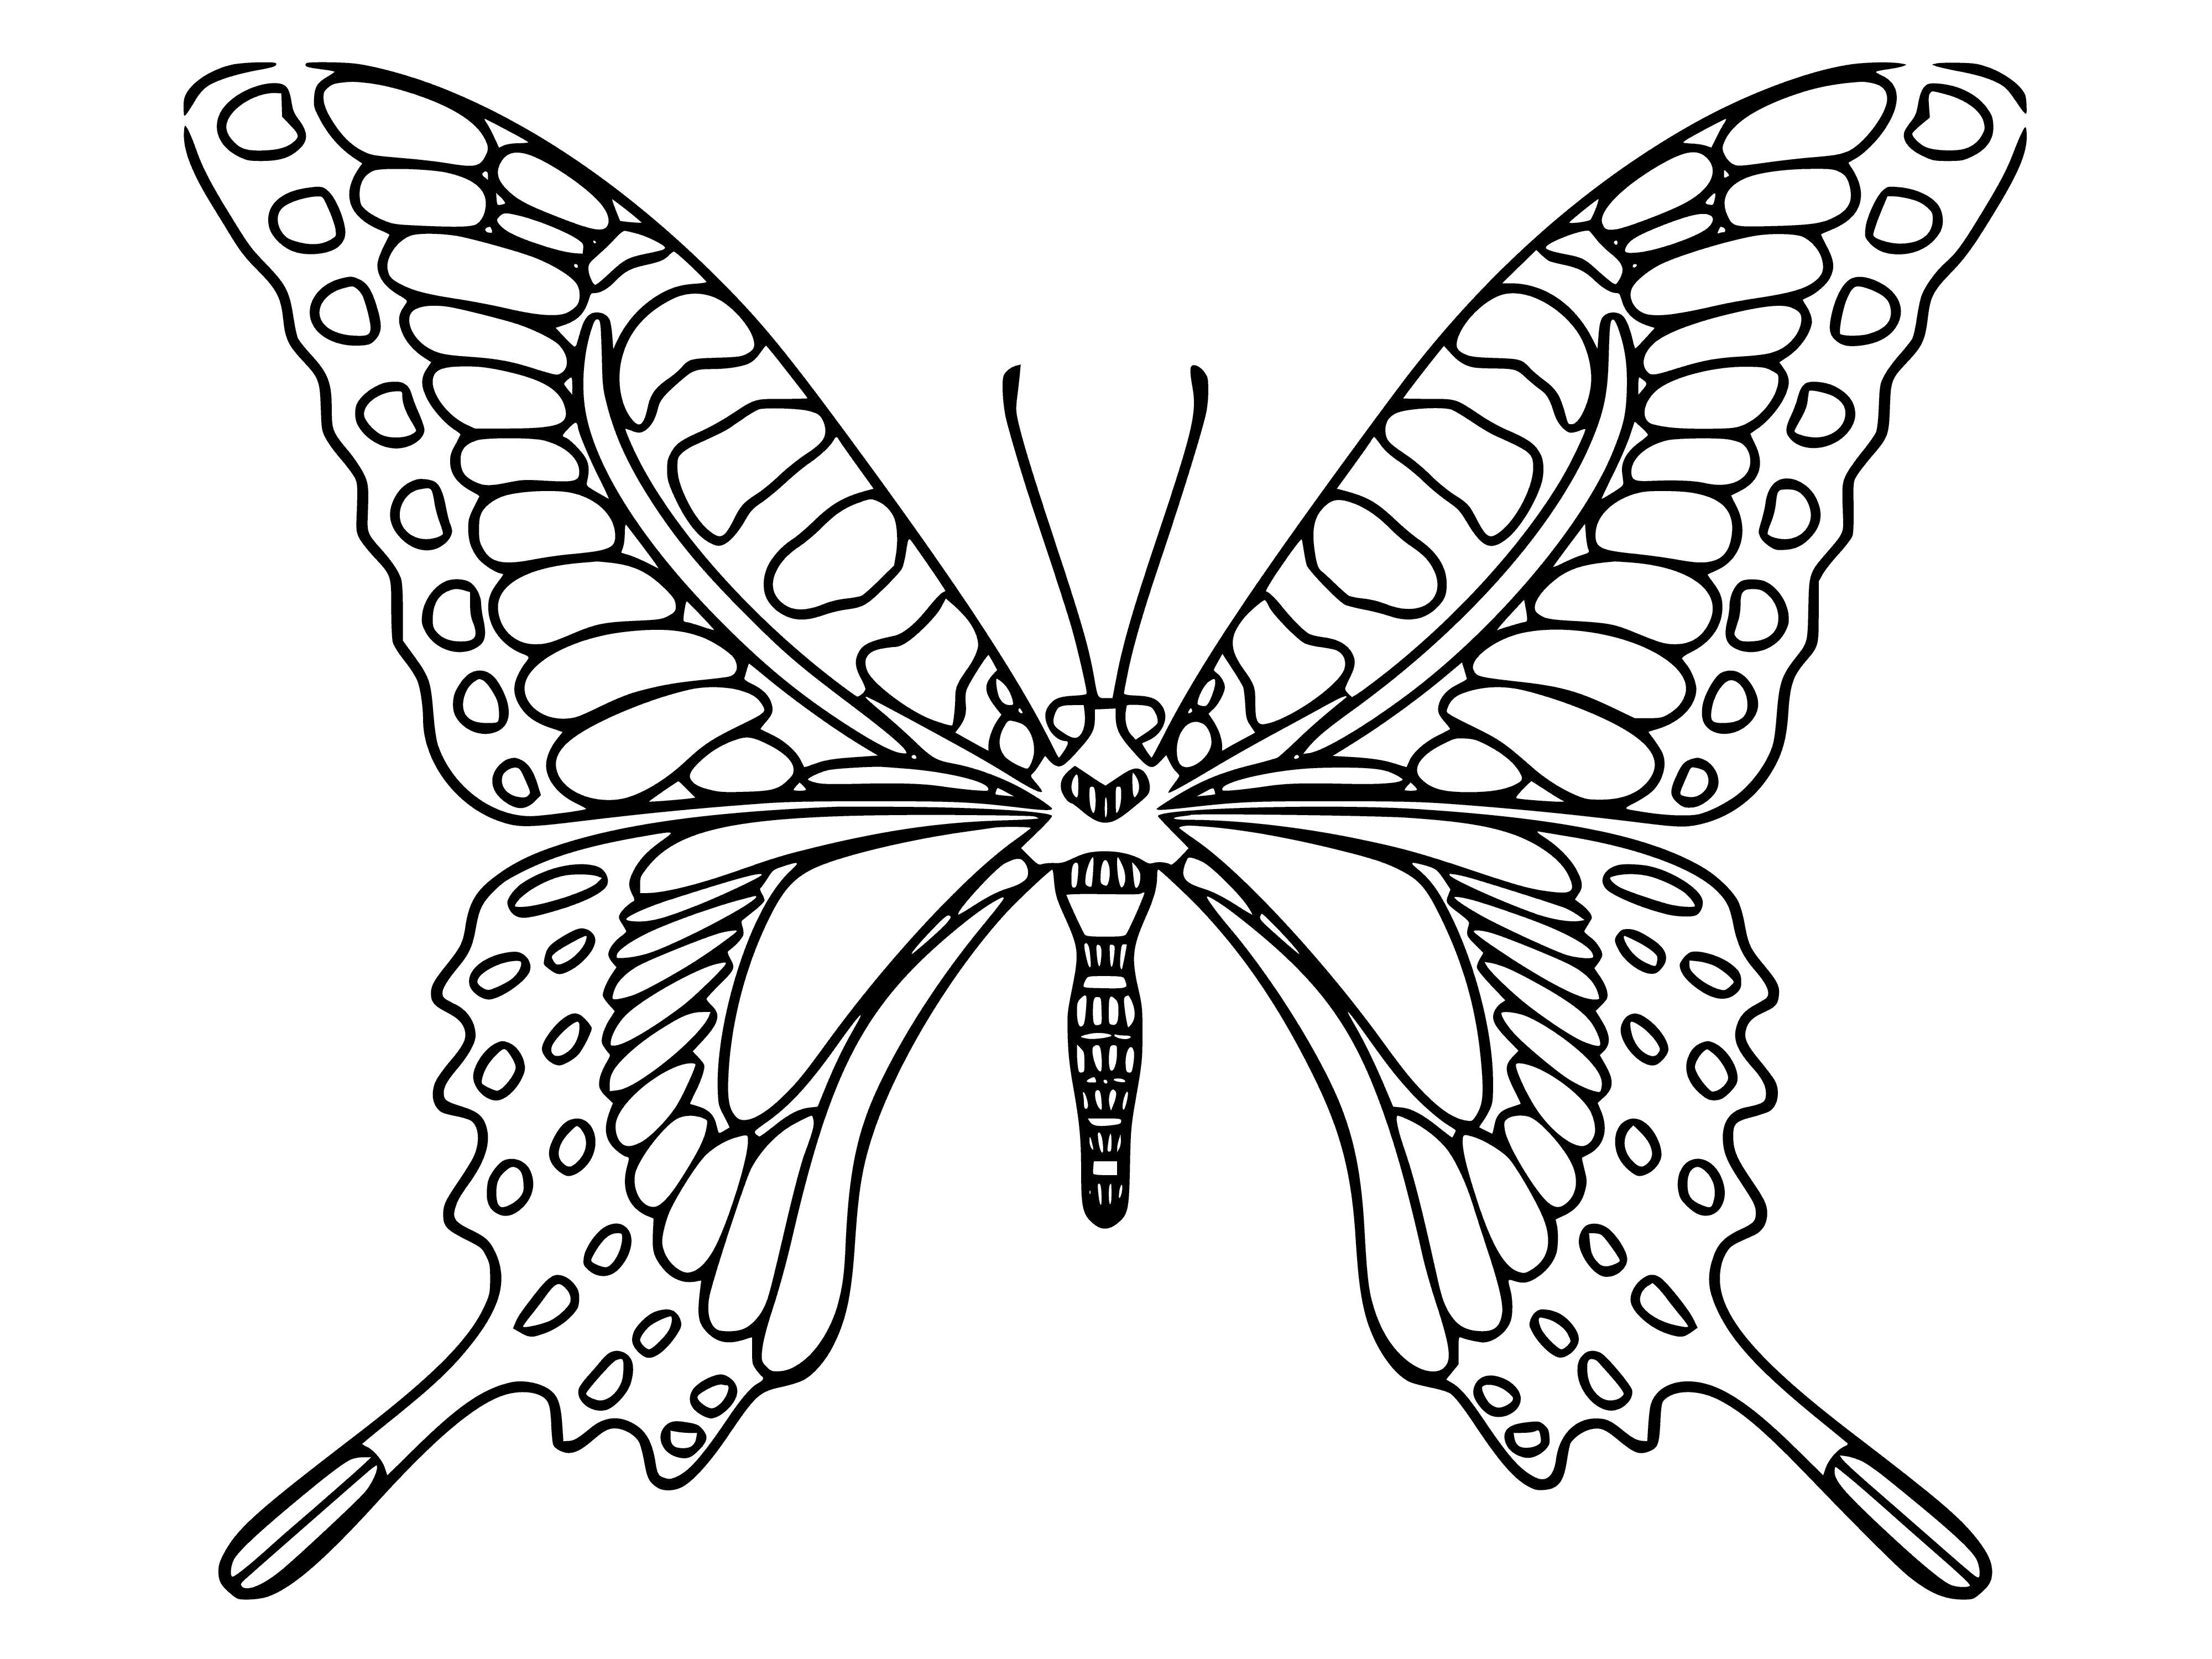 coloring page: Butterflies have two big wings w/ colorful scales, a long thin body and delicate legs. Their wings are brightly patterned to attract mates. #biology